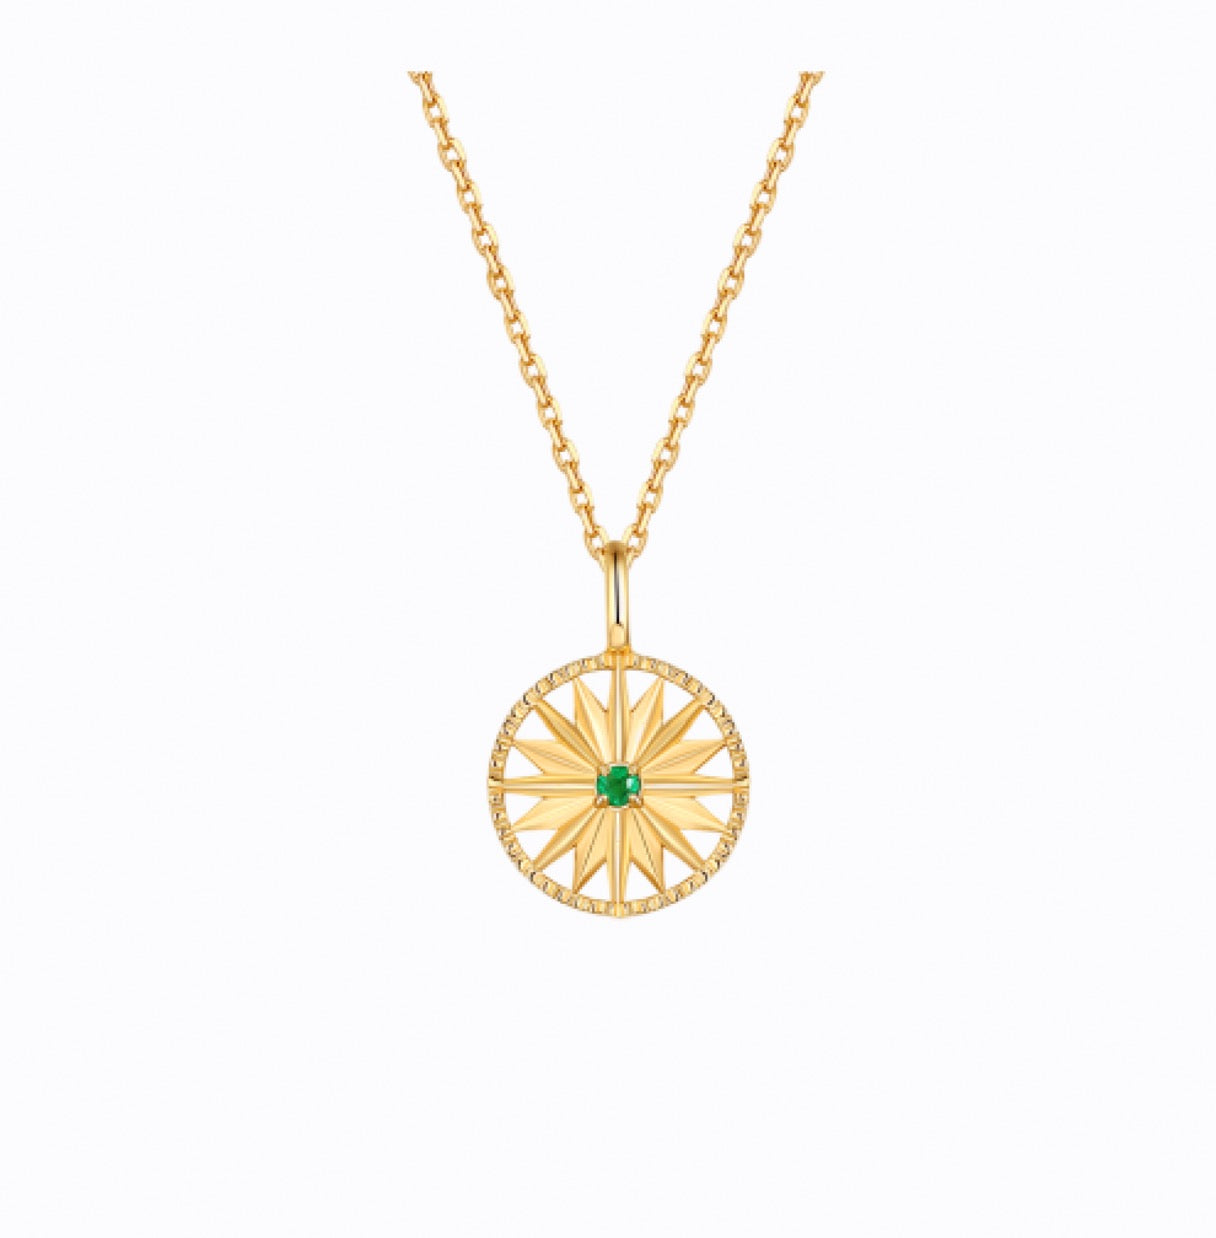 Emerald Star Pendant Necklace, 14ct Gold Plate